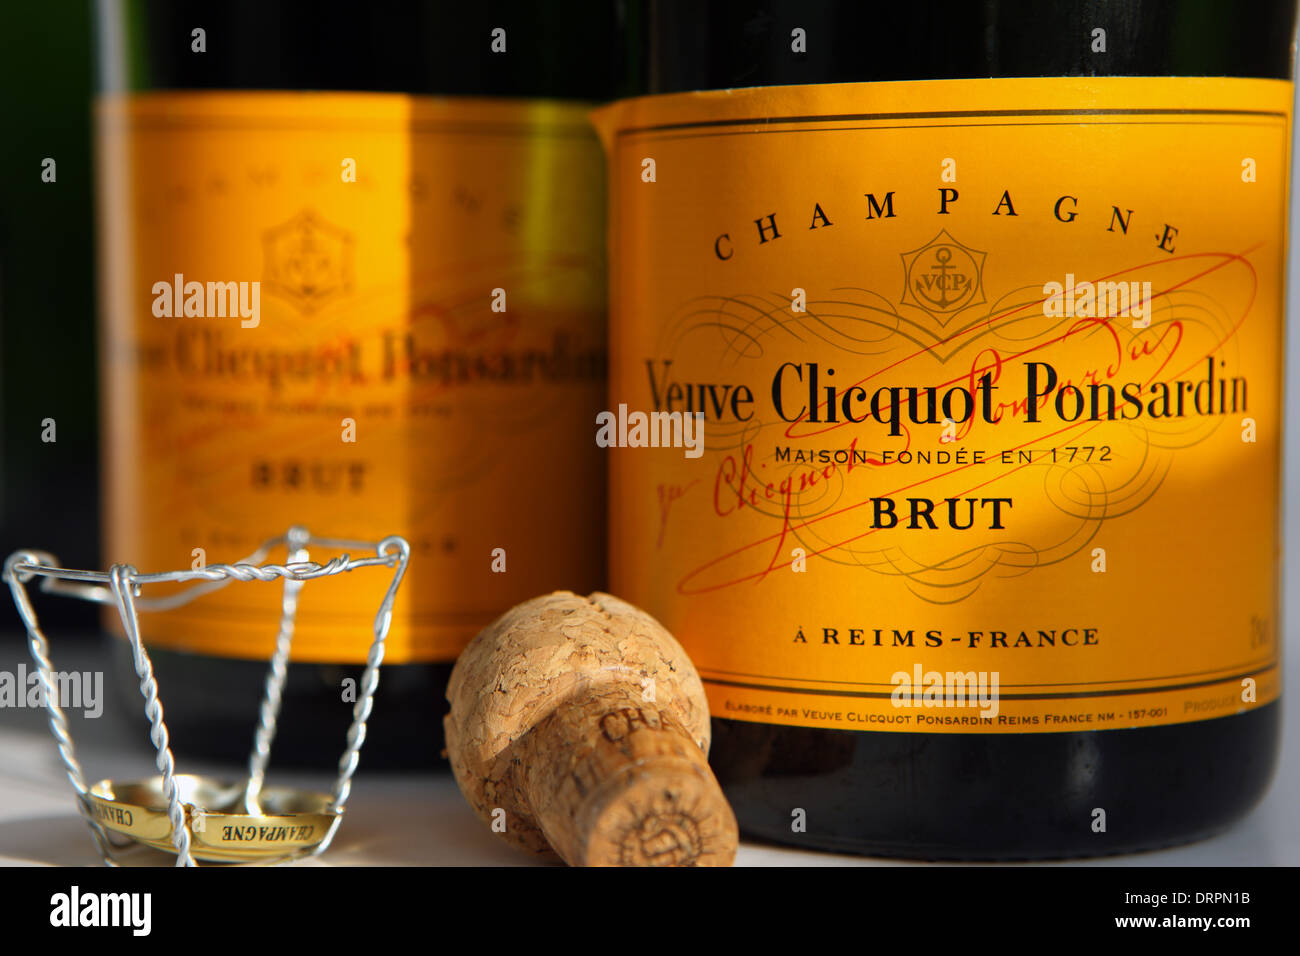 hi-res - Veuve stock bottle clicquot champagne Alamy and images photography